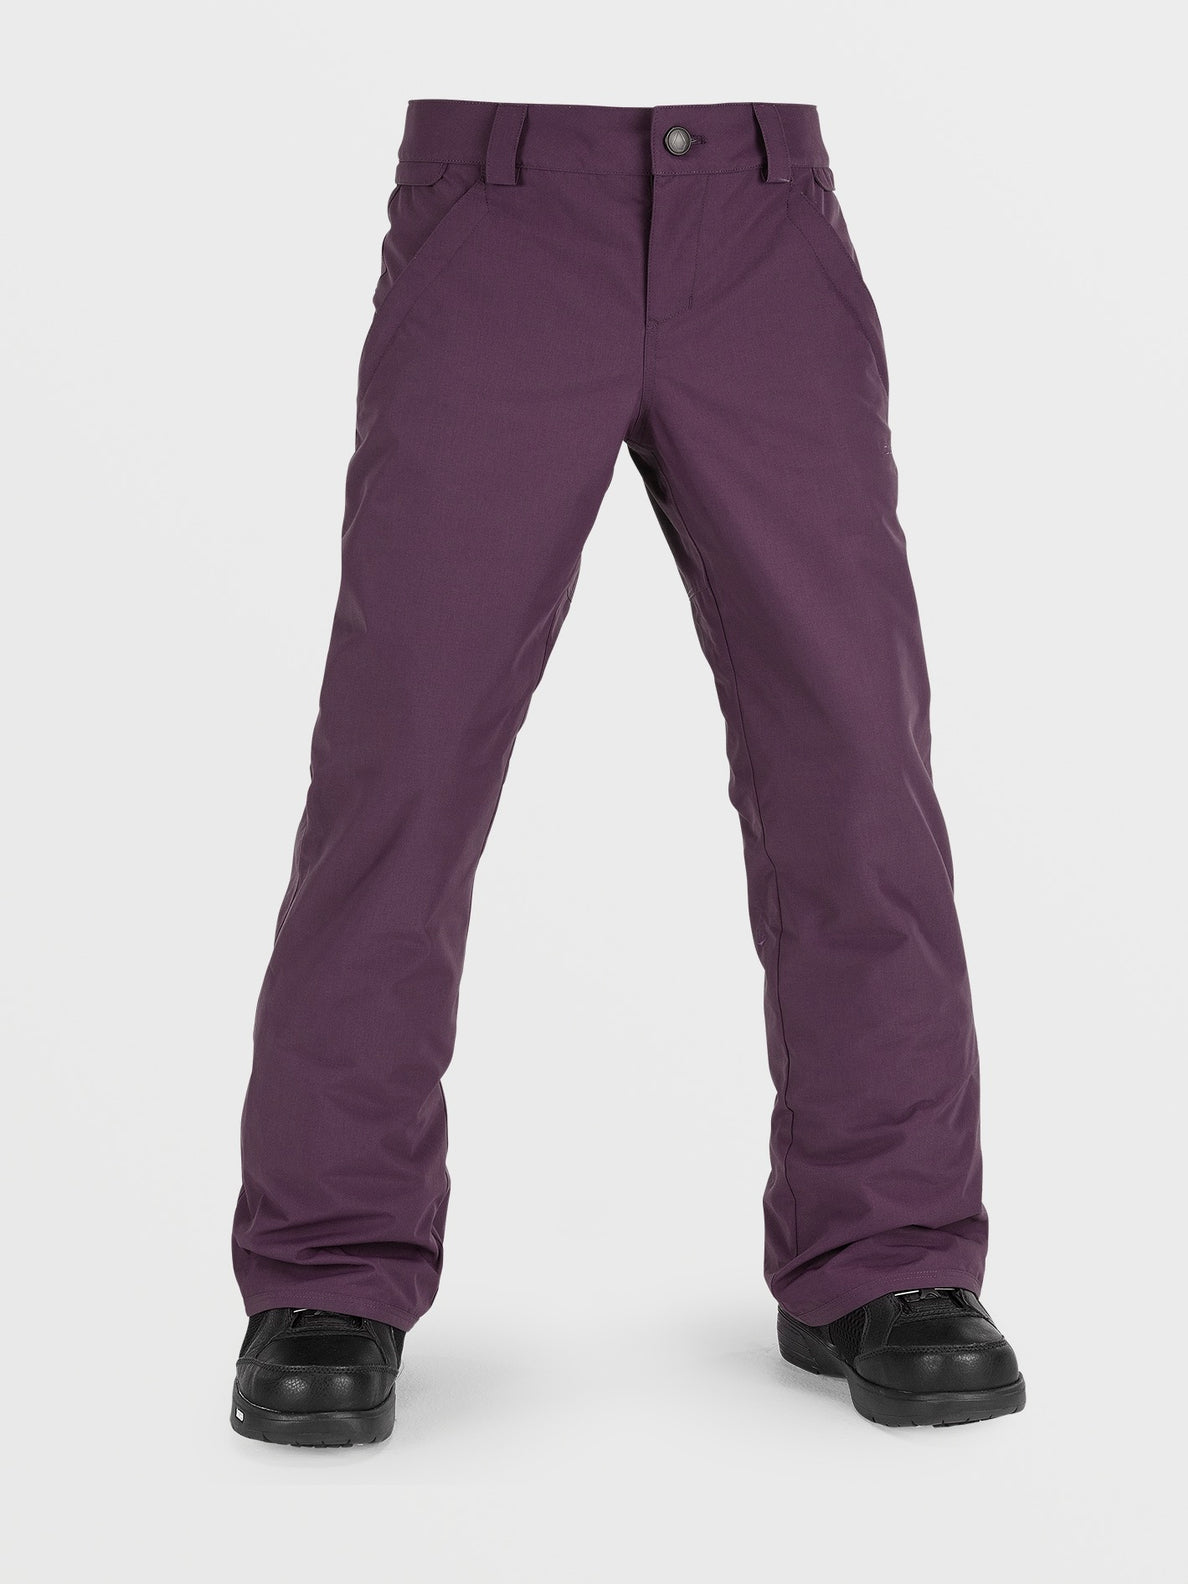 Kids Insulated Snowsports Cargo Pants